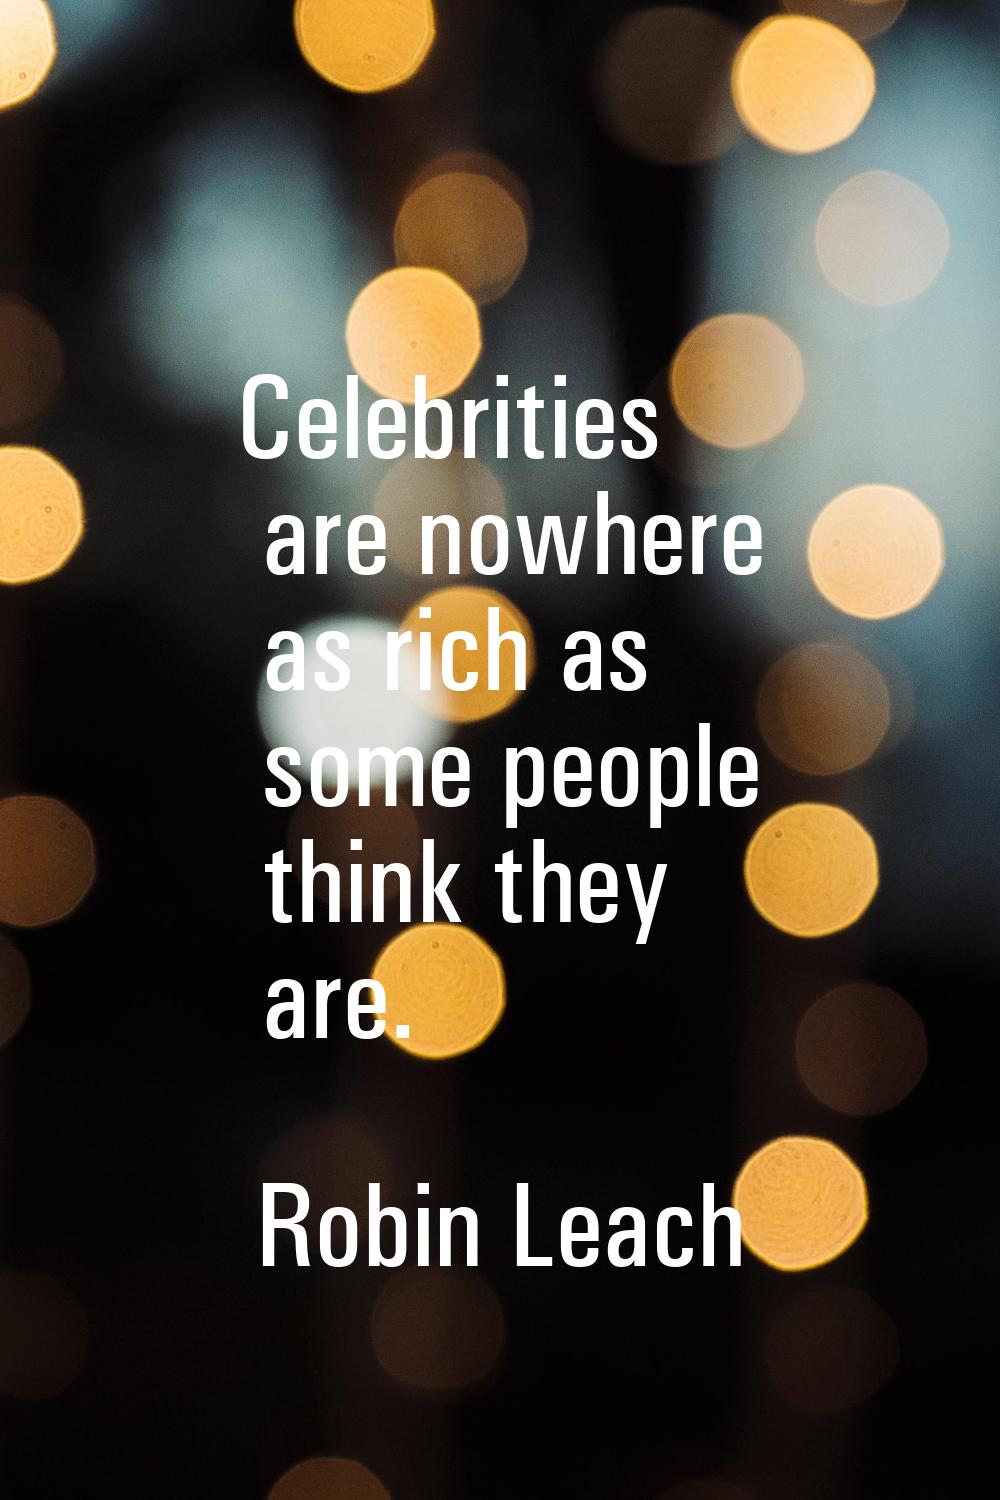 Celebrities are nowhere as rich as some people think they are.